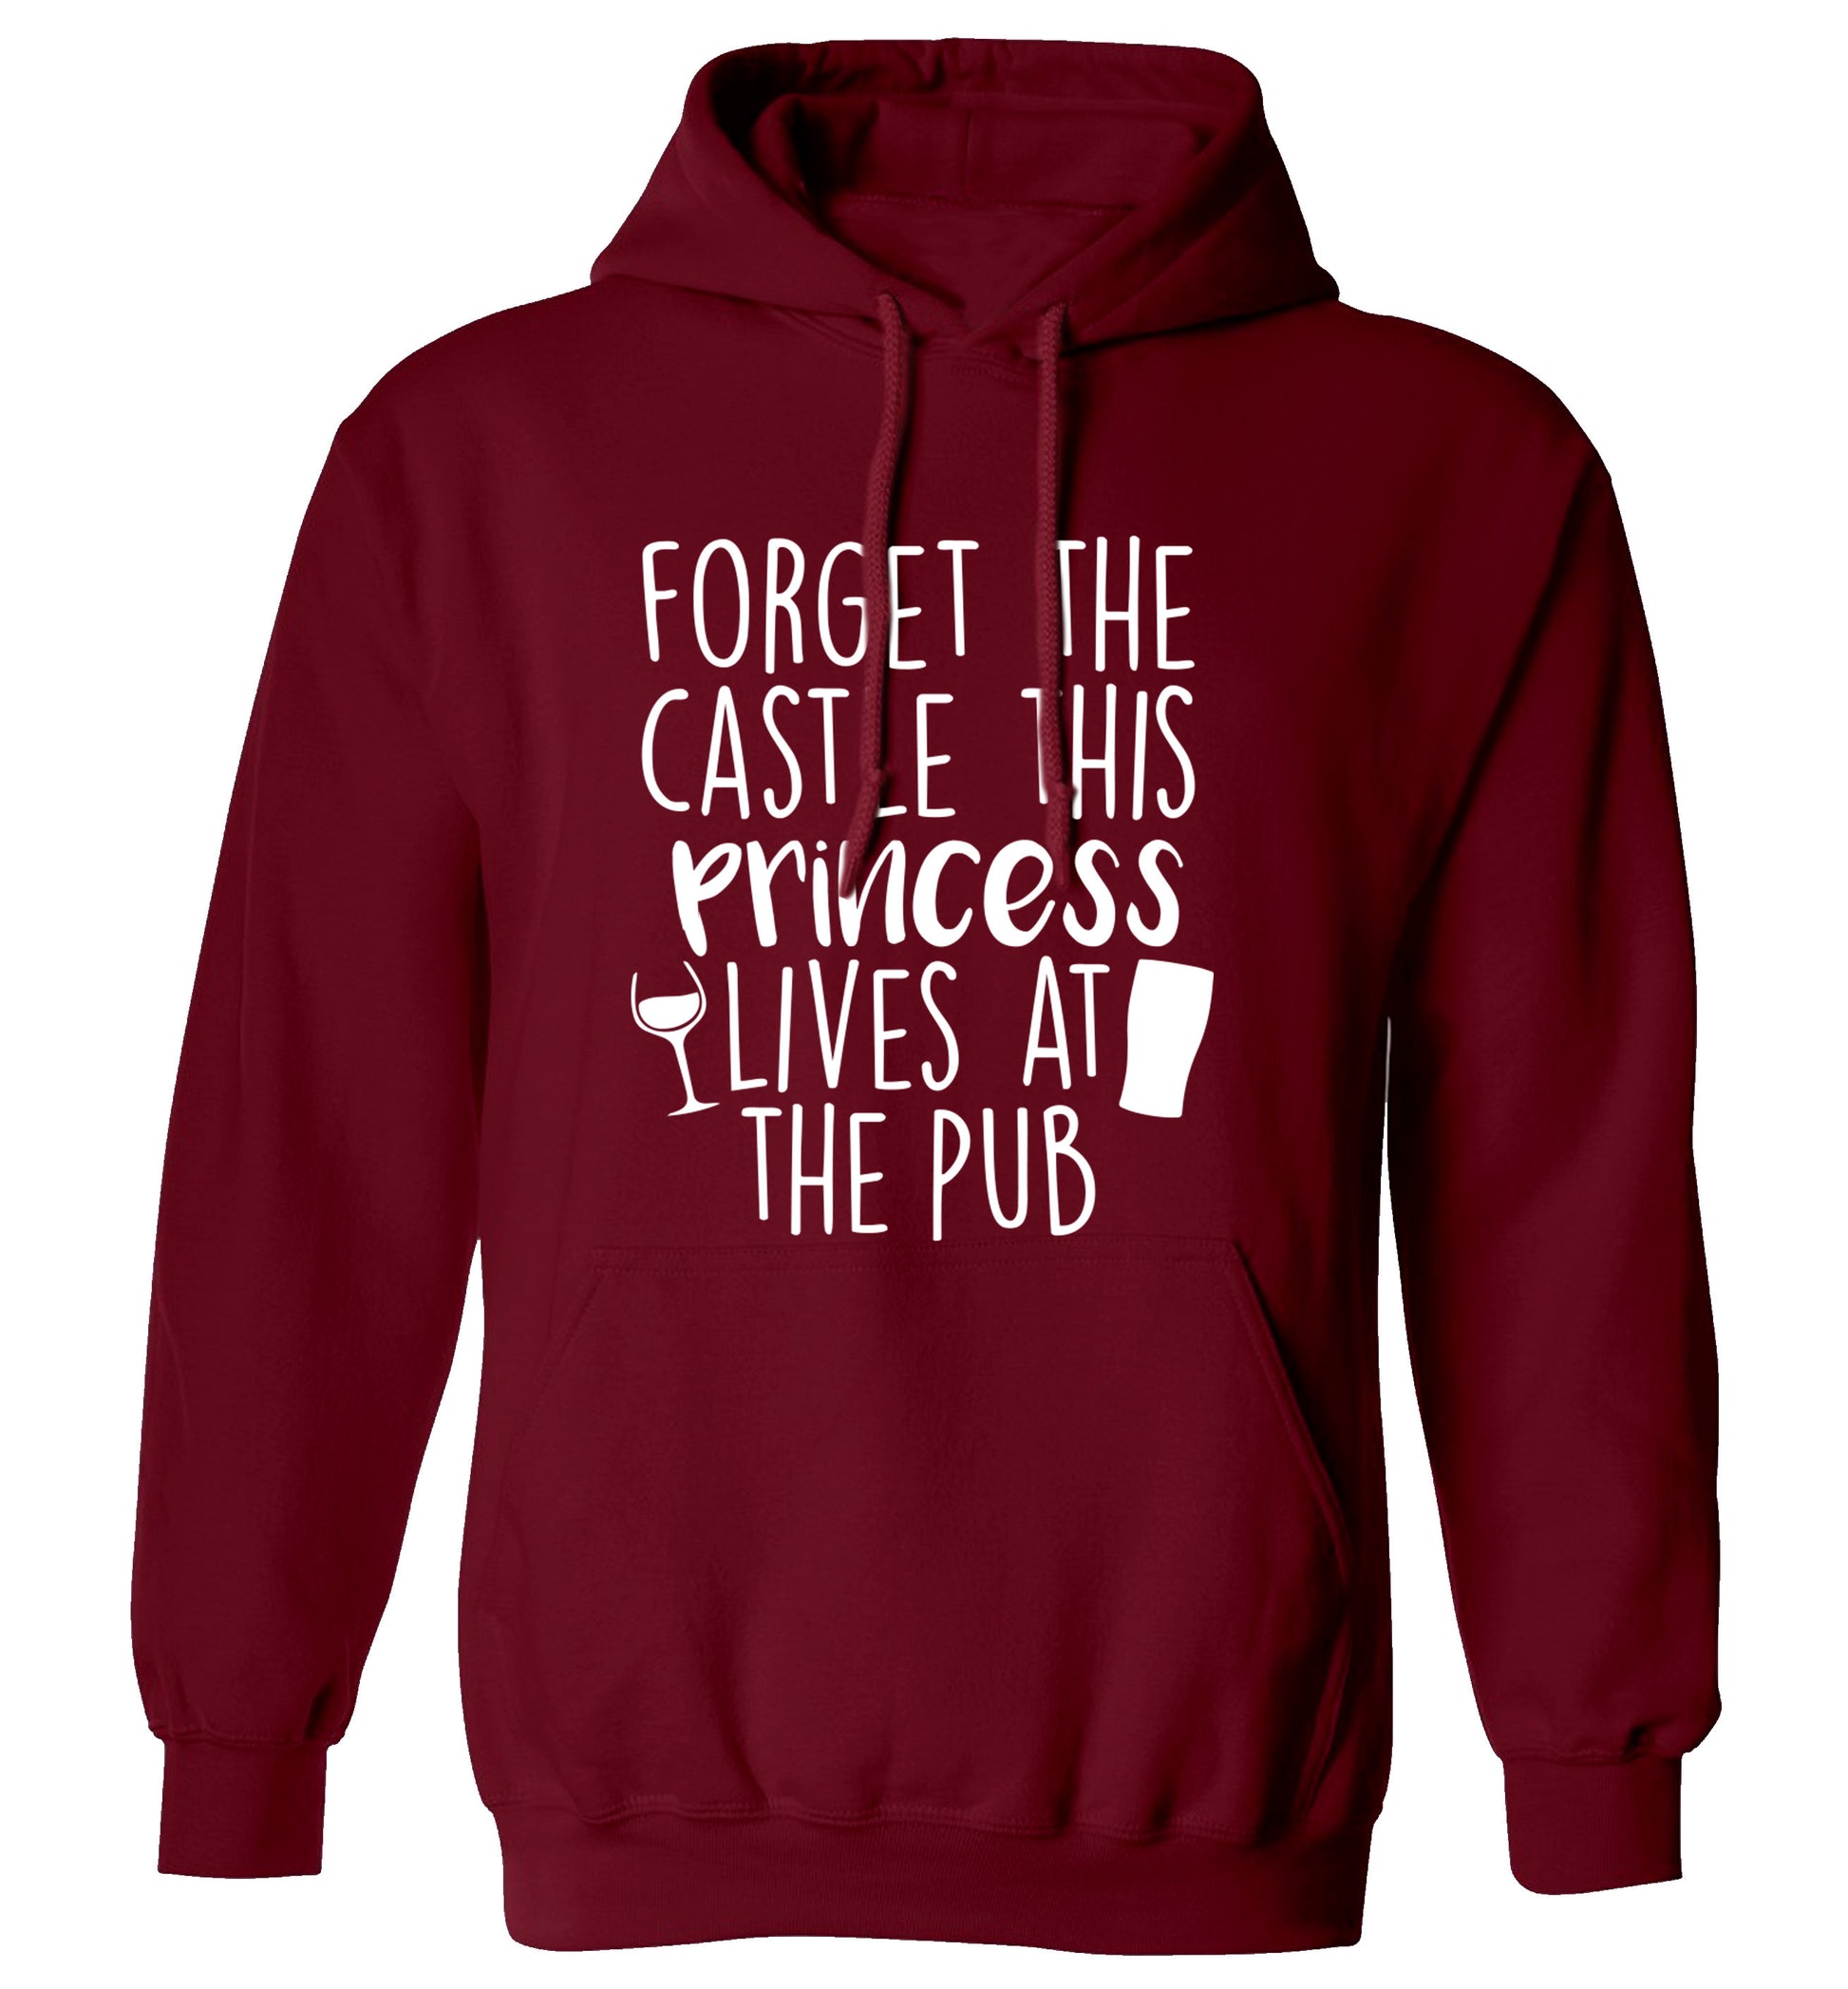 Forget the castle this princess lives at the pub adults unisex maroon hoodie 2XL